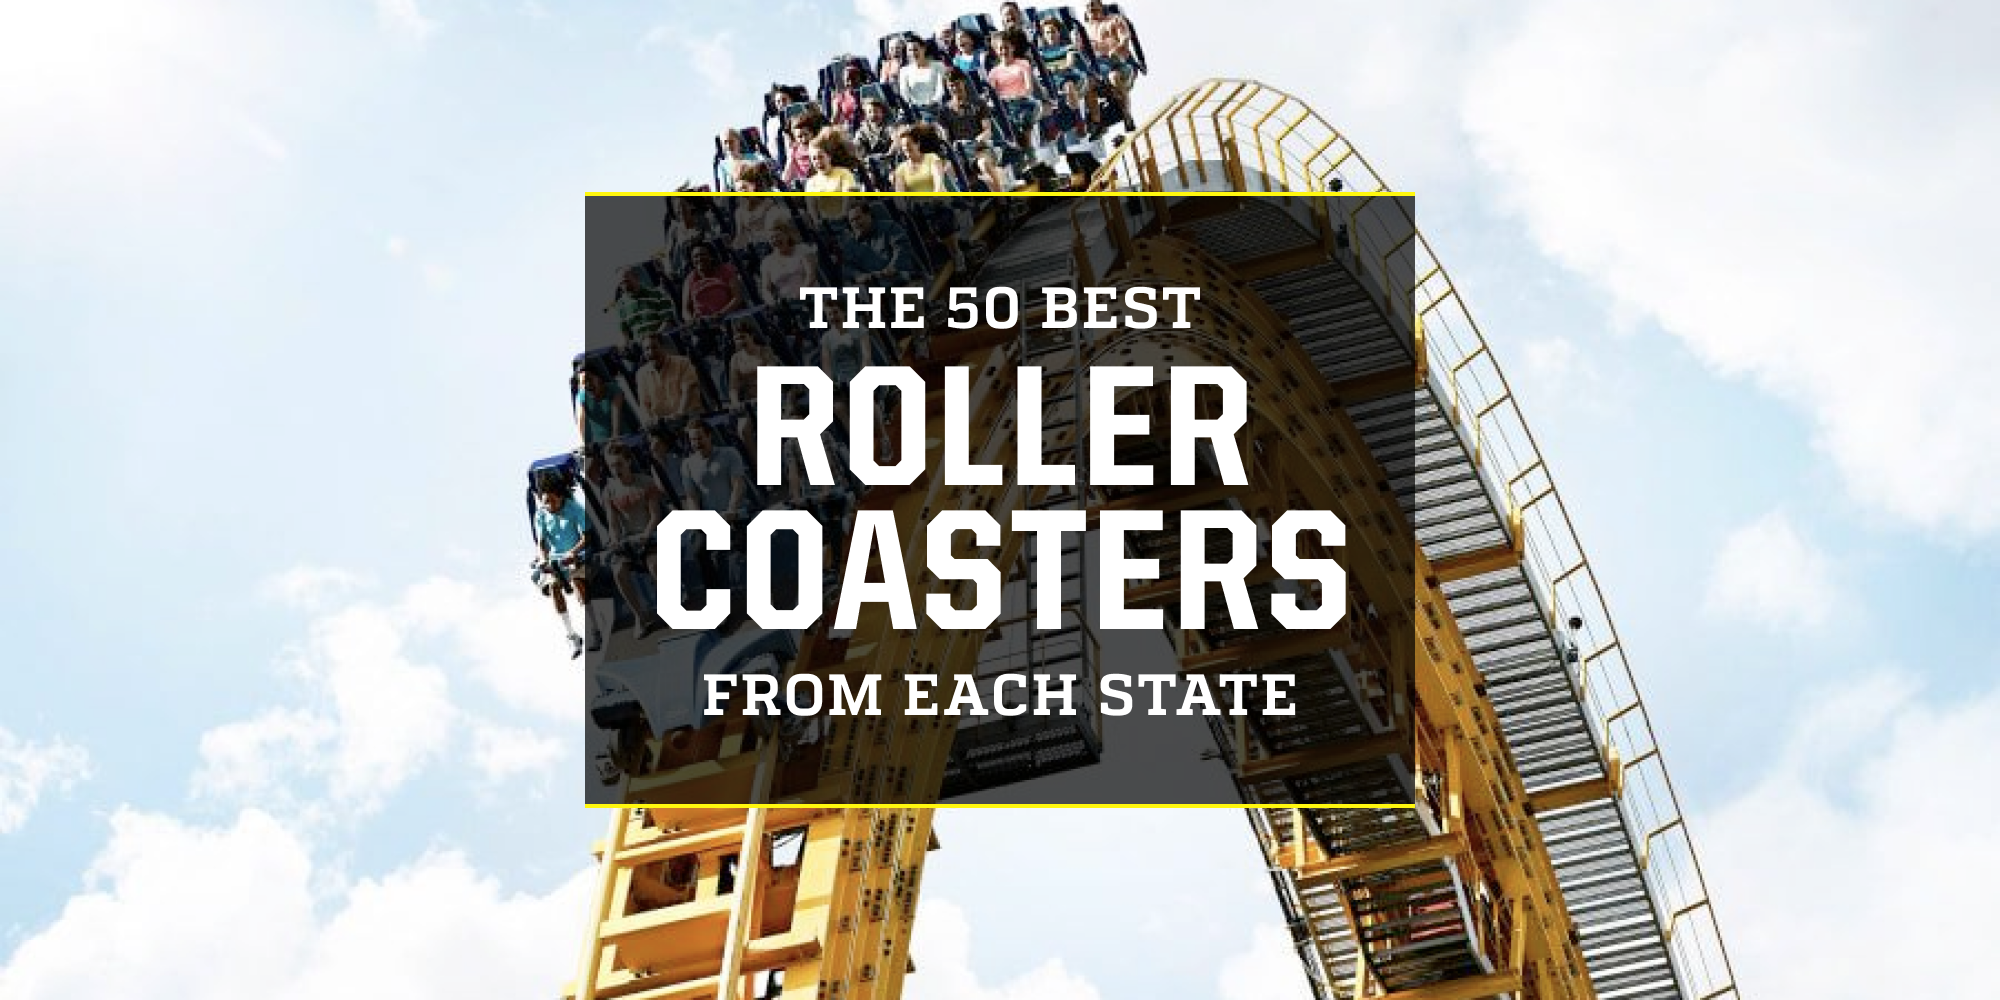 Colorado Is Opening the Highest Looping Roller Coaster in the U.S. — With  the Steepest Freefall Drop in the West